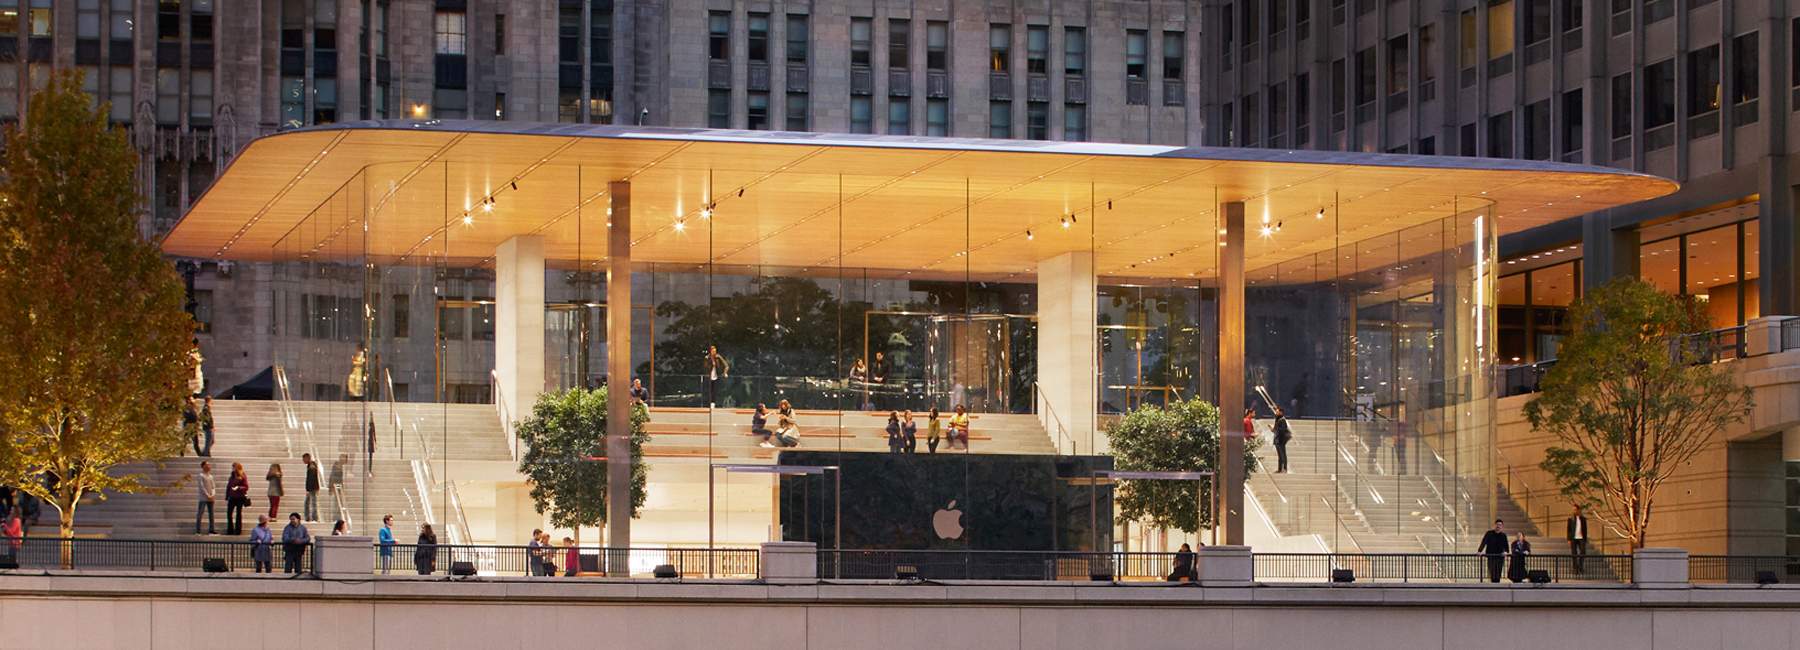 Macbook Roofed Apple Store Opens On Chicago S Riverfront